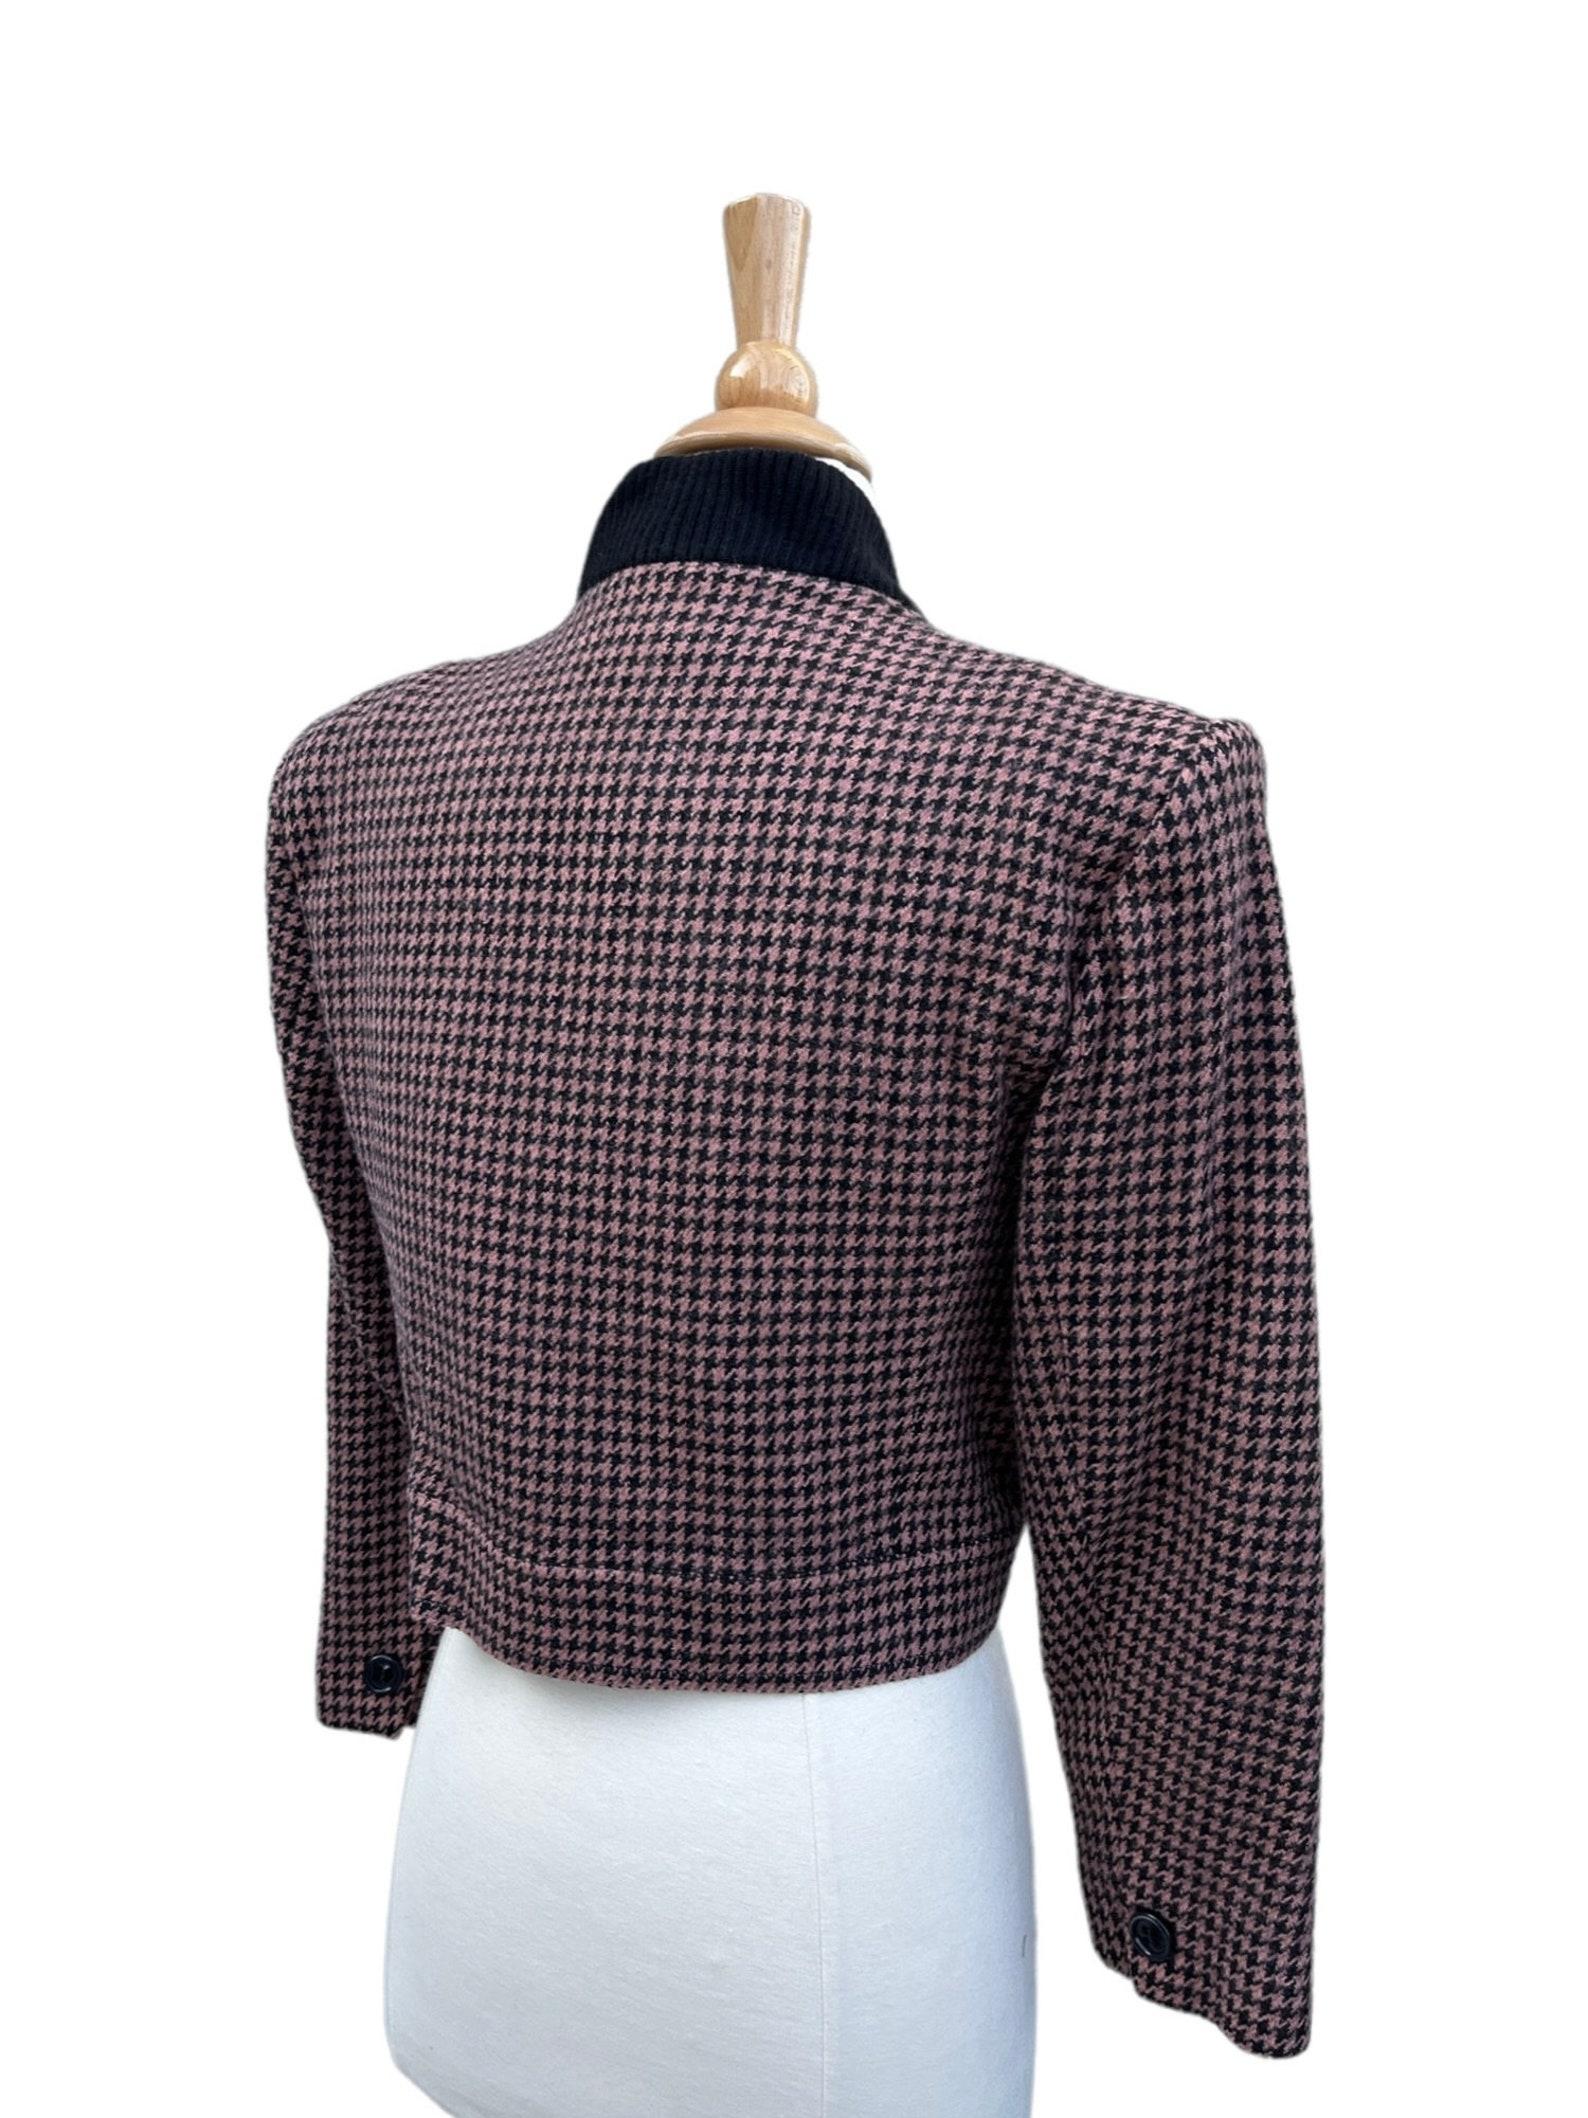 Guy Laroche Houndstooth Jacket, Circa 1980s For Sale 4